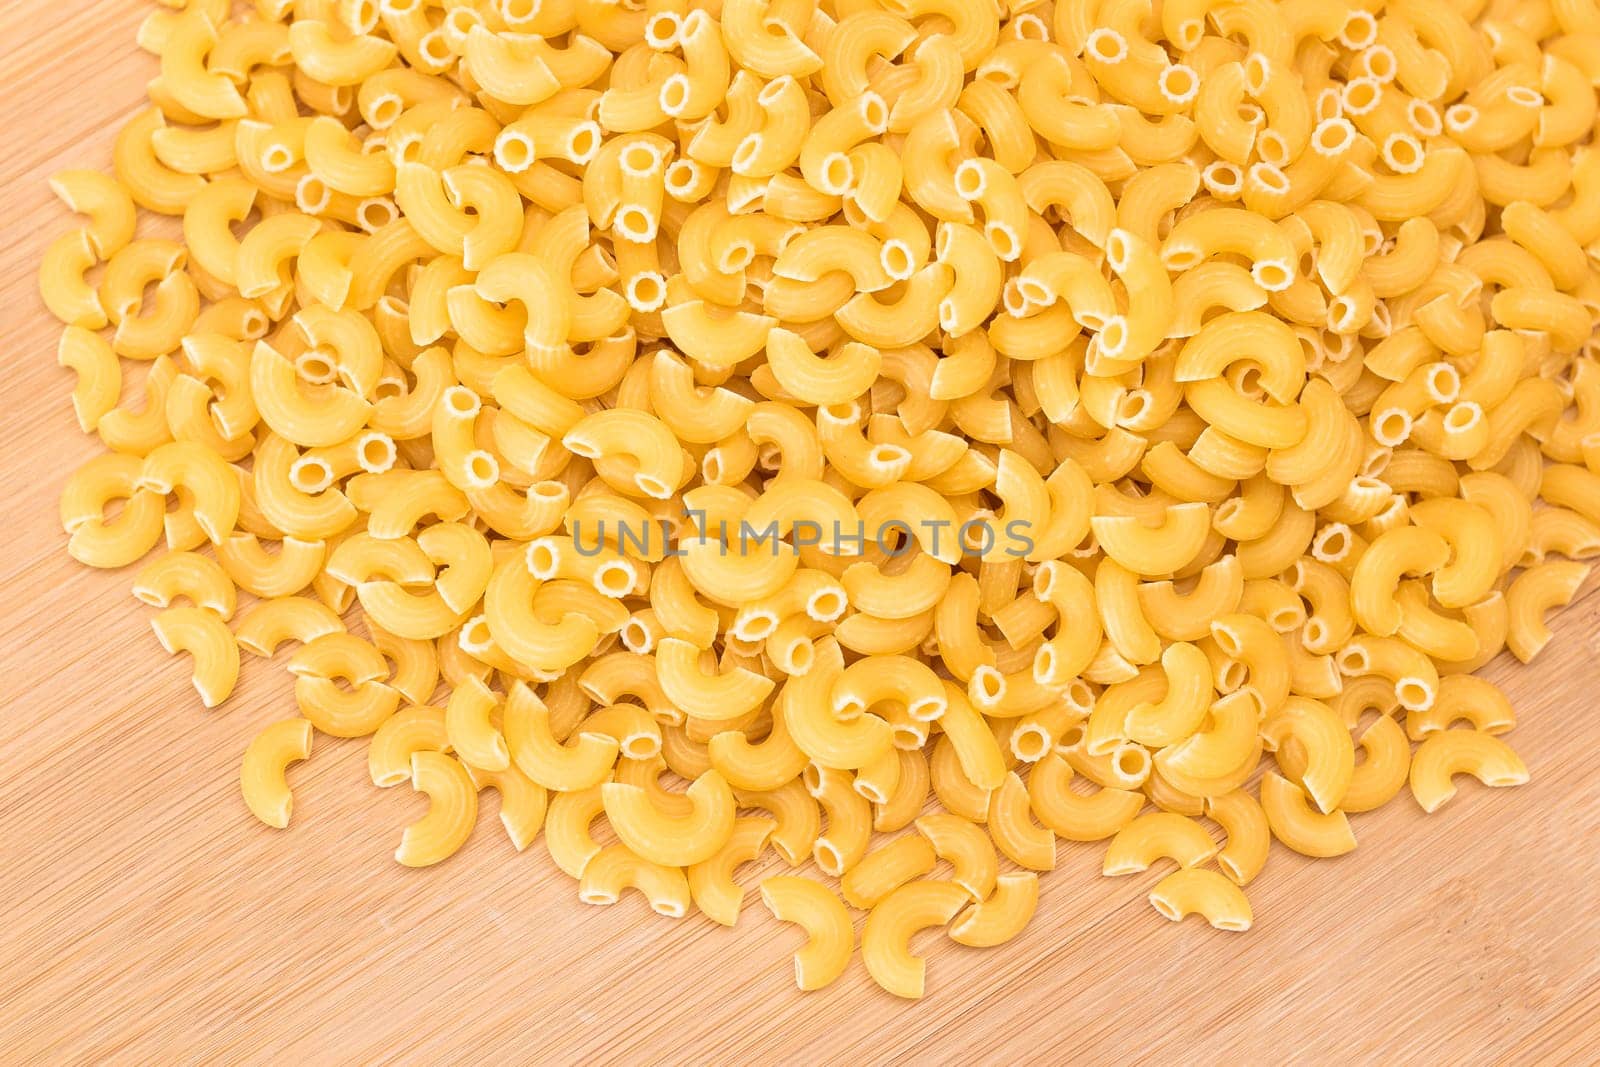 A Heap of Uncooked Chifferi Rigati Pasta on Wooden Kitchen Board. Fat and Unhealthy Food. Classic Dry Macaroni. Italian Culture and Cuisine. Raw Pasta